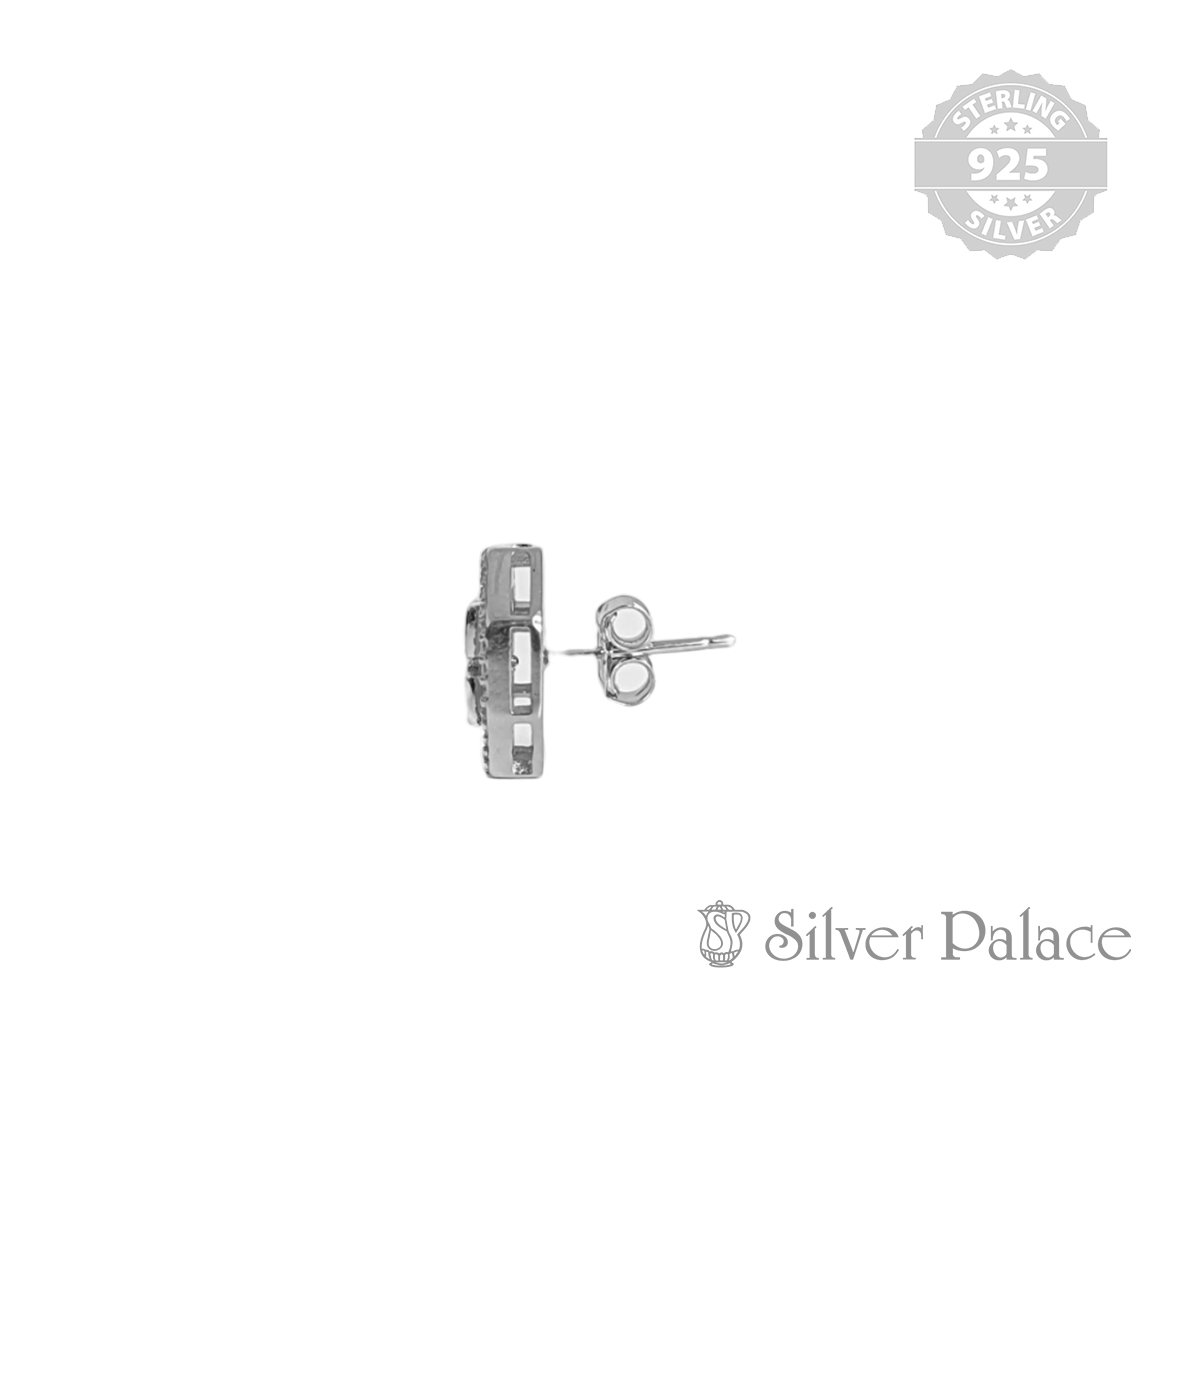 92.5 STERLING SILVER D&G STUD FOR GIRLS